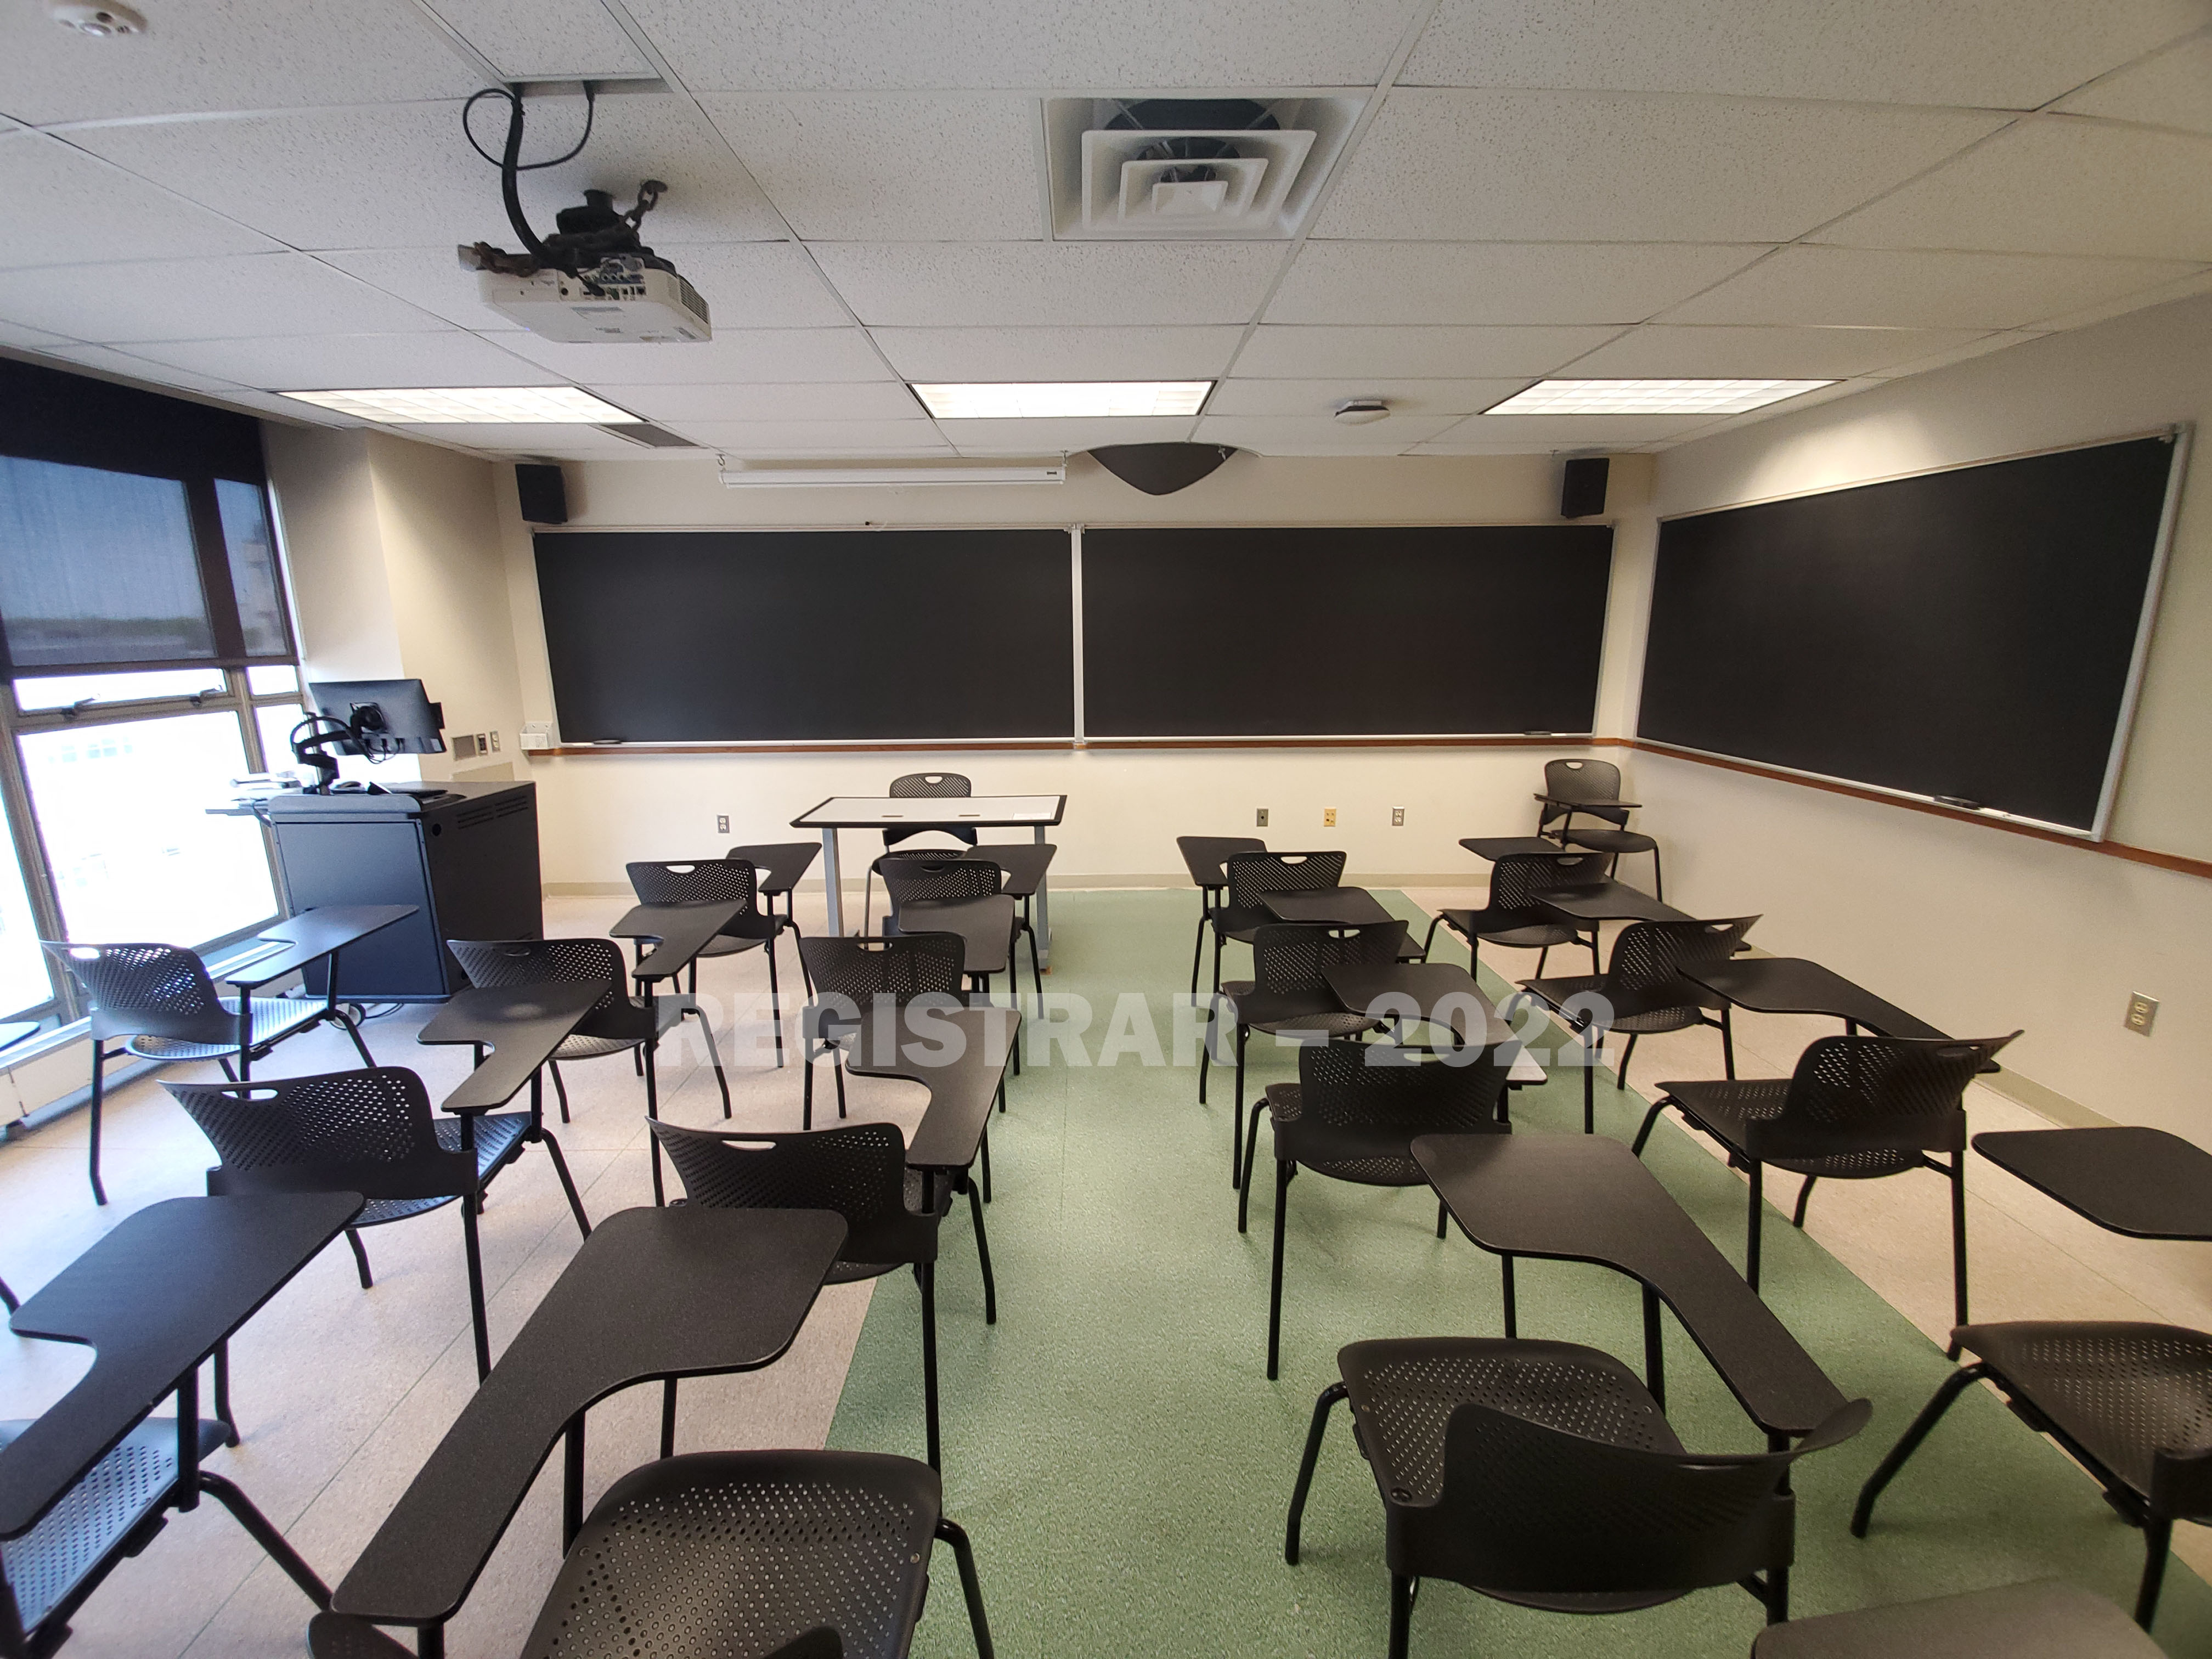 Enarson Classroom Building room 346 ultra wide angle view from the back of the room